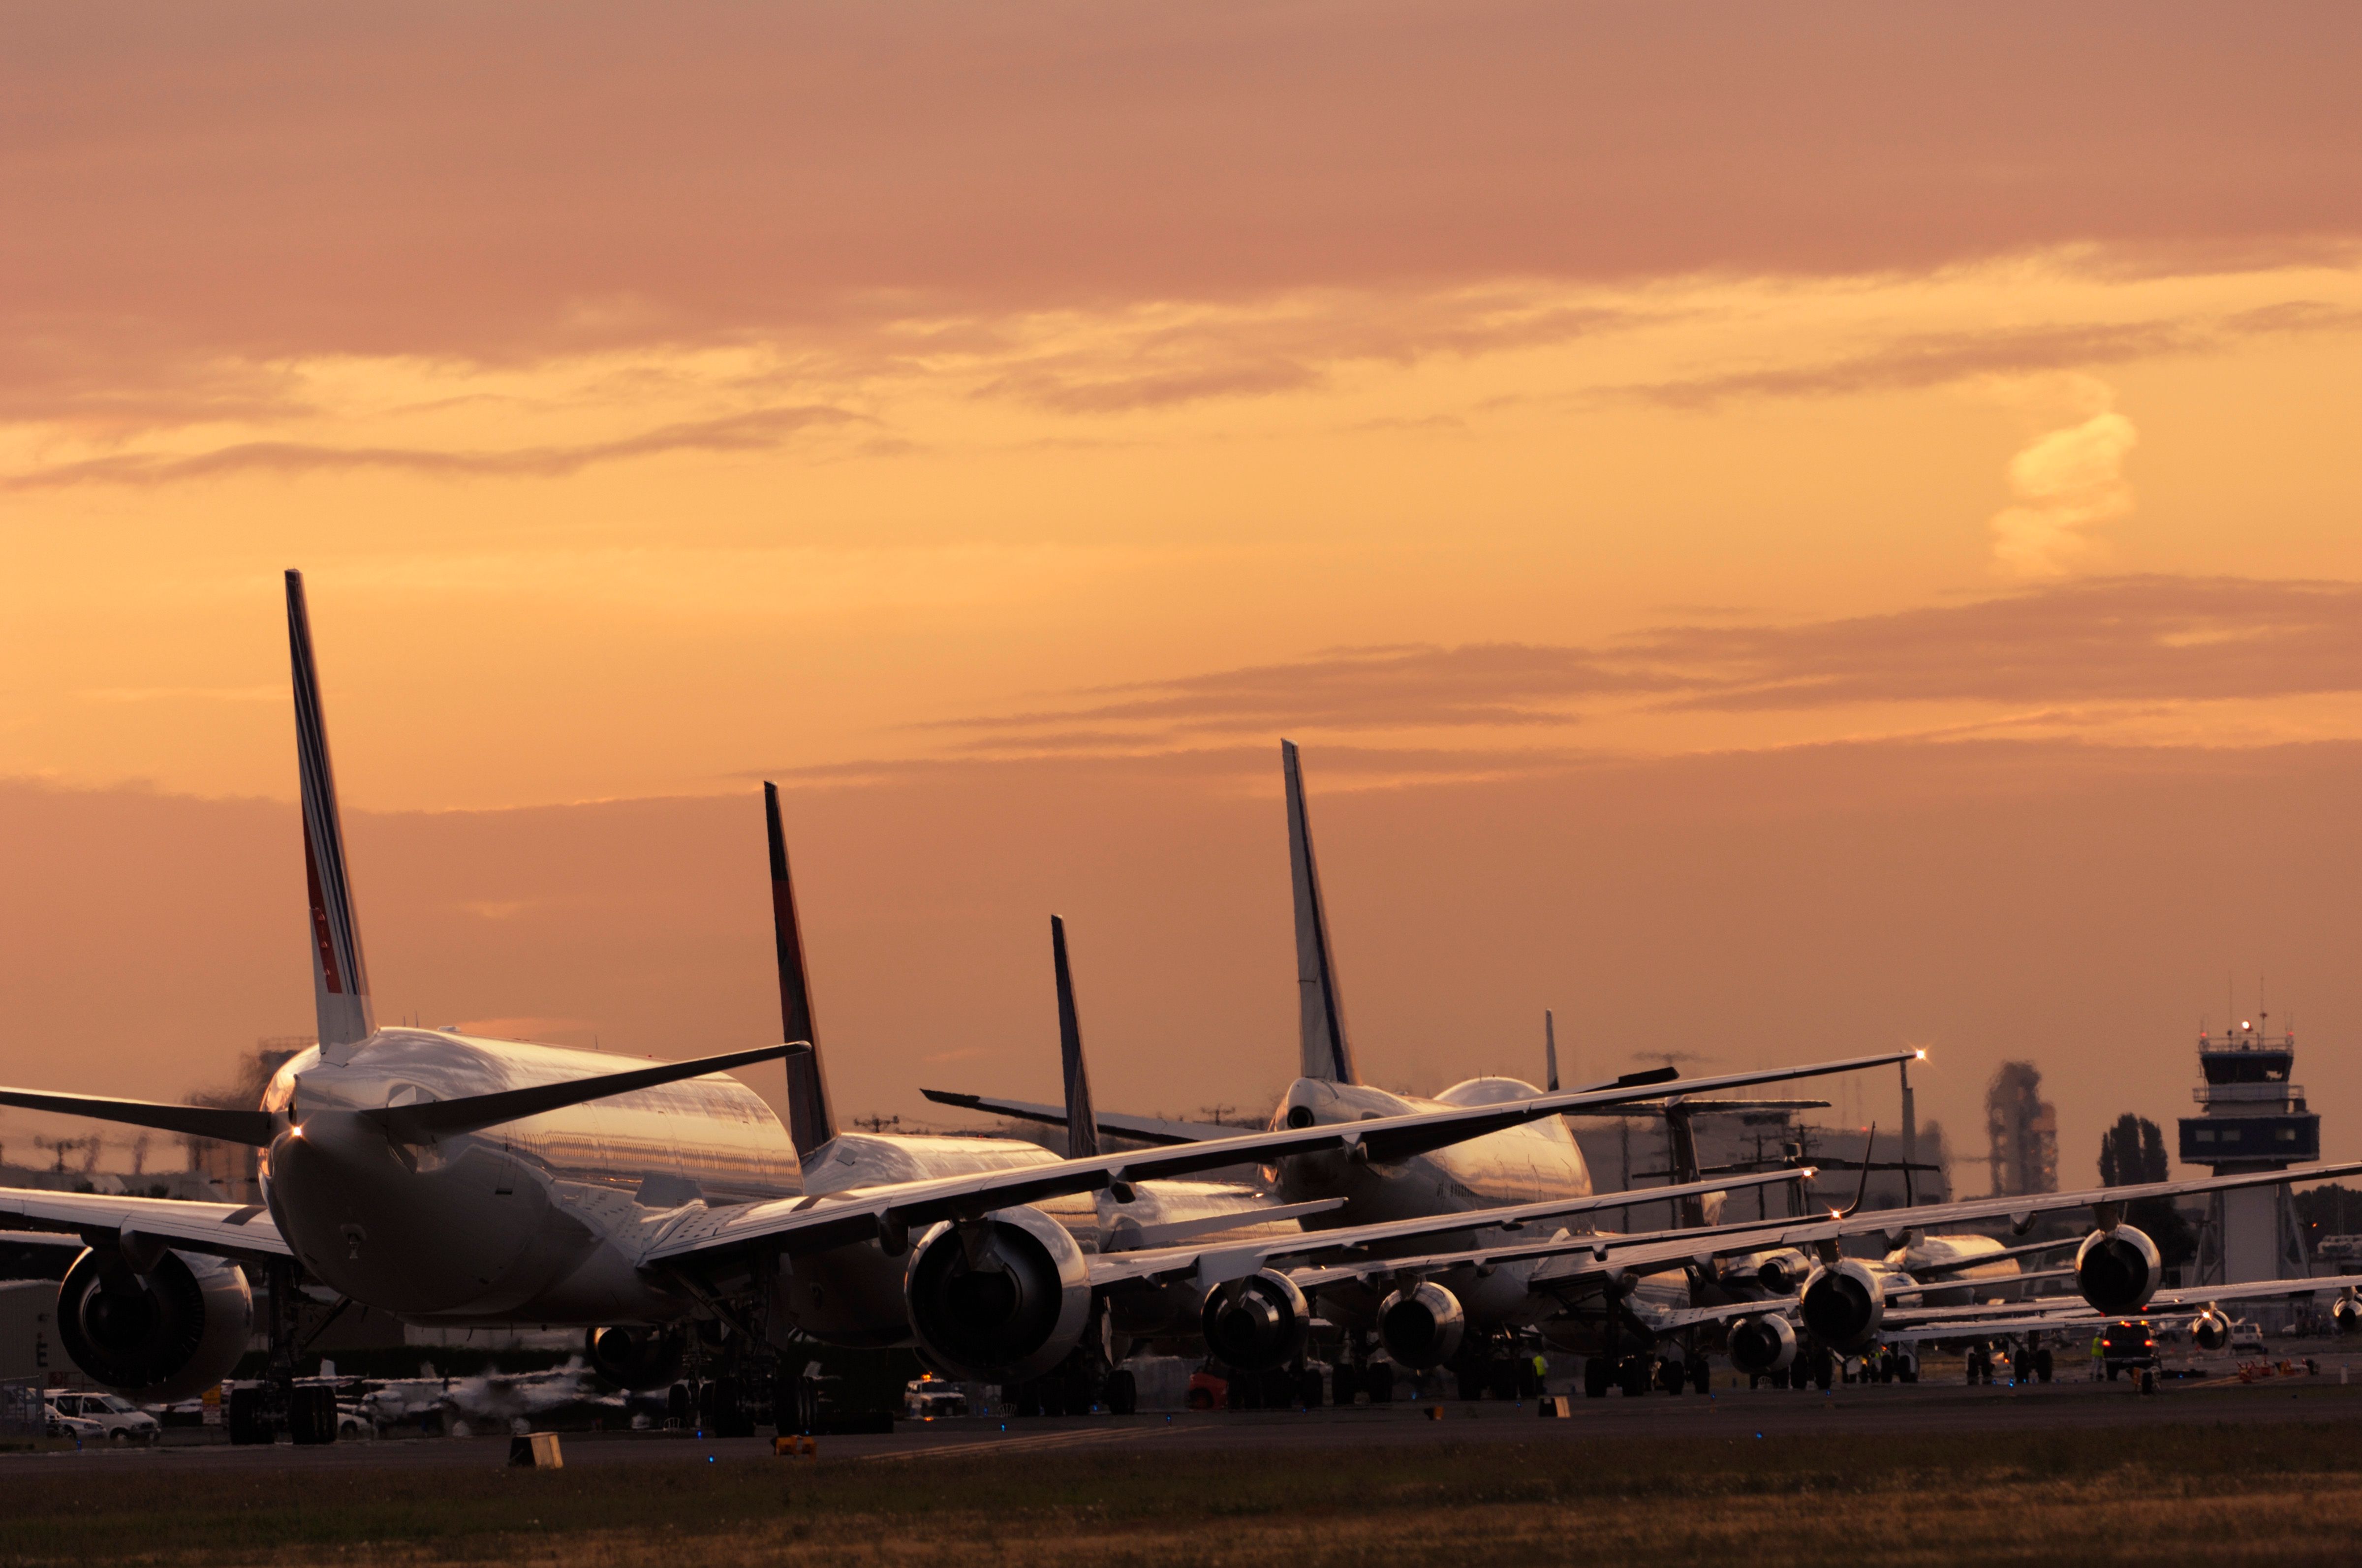 Several Boeing jets lined up at sunset